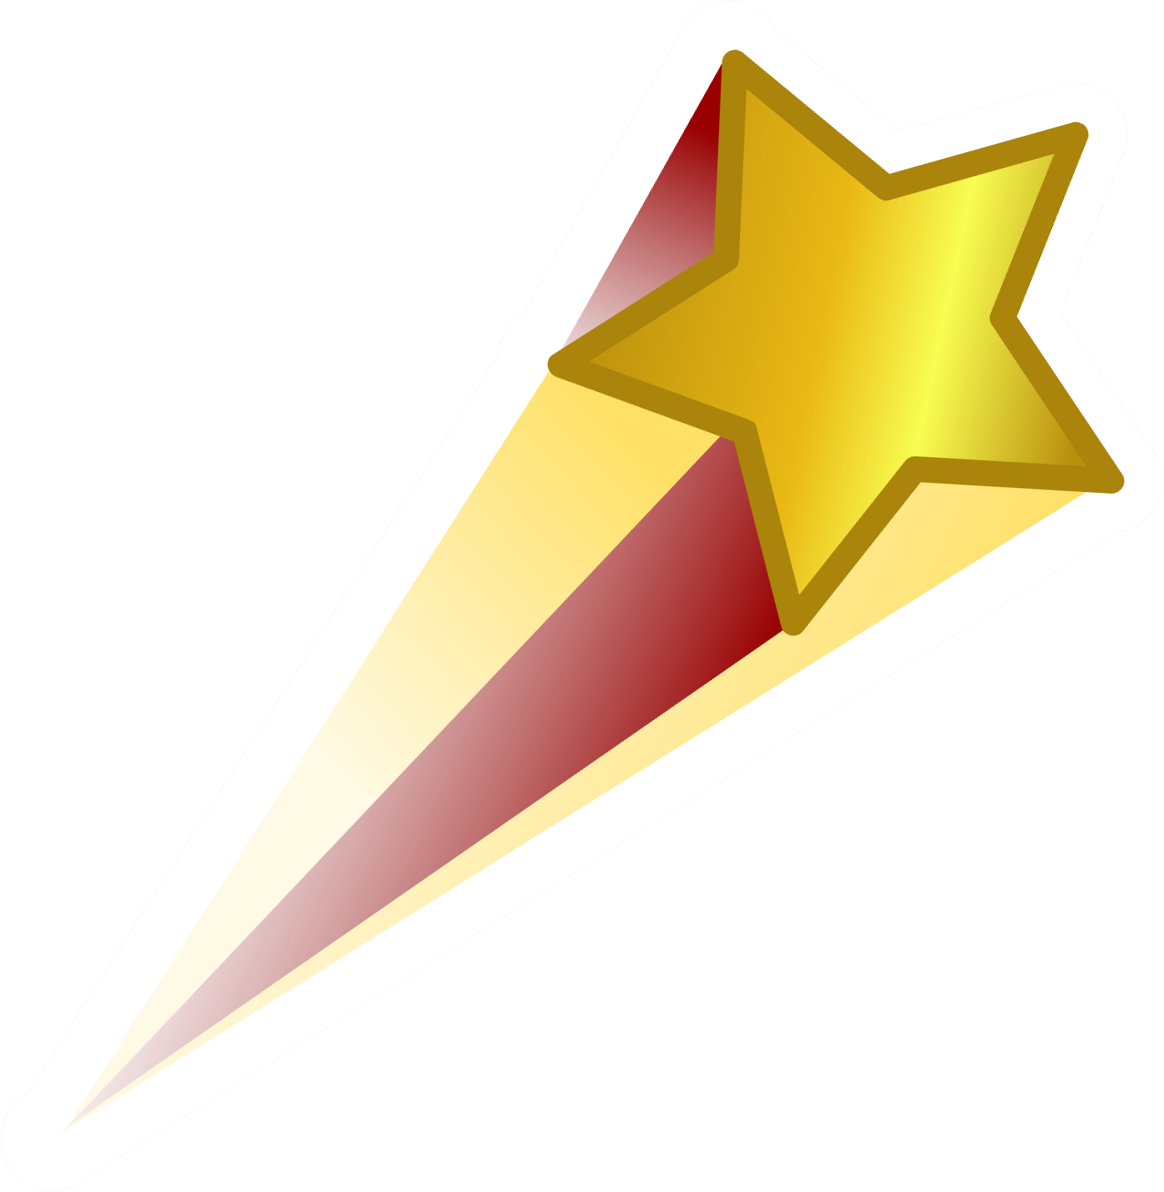 Shooting Star Cartoon Png Clipart Stars Clipartix Seeking For Free Shooting Star Png Images